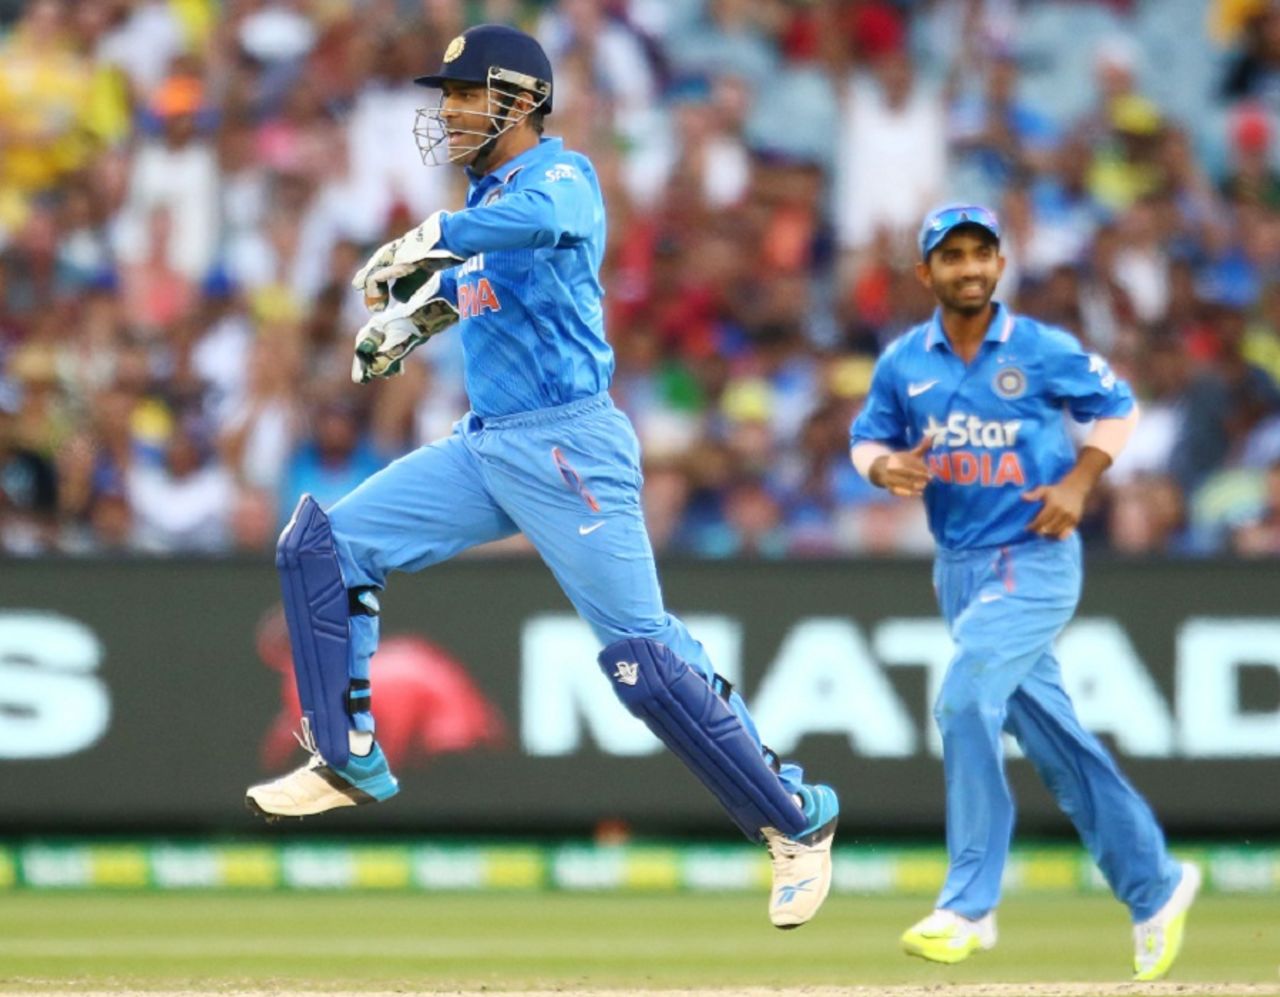 MS Dhoni takes off after stumping George Bailey, Australia v India, 3rd ODI, Melbourne, January 17, 2016